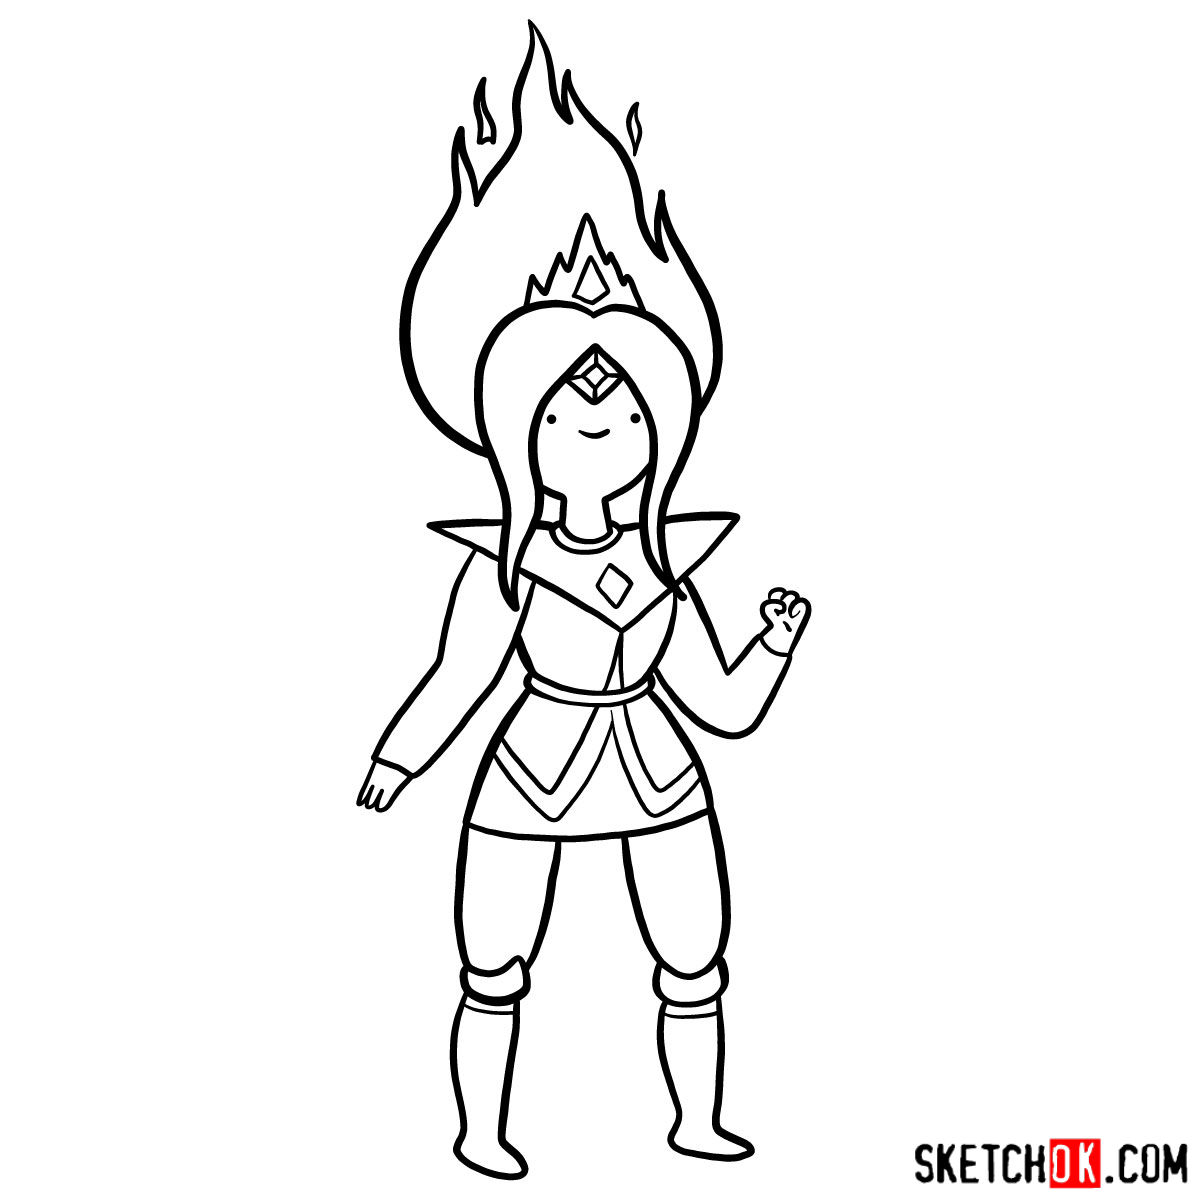 How to draw Flame Princess from Adventure Time - step 11